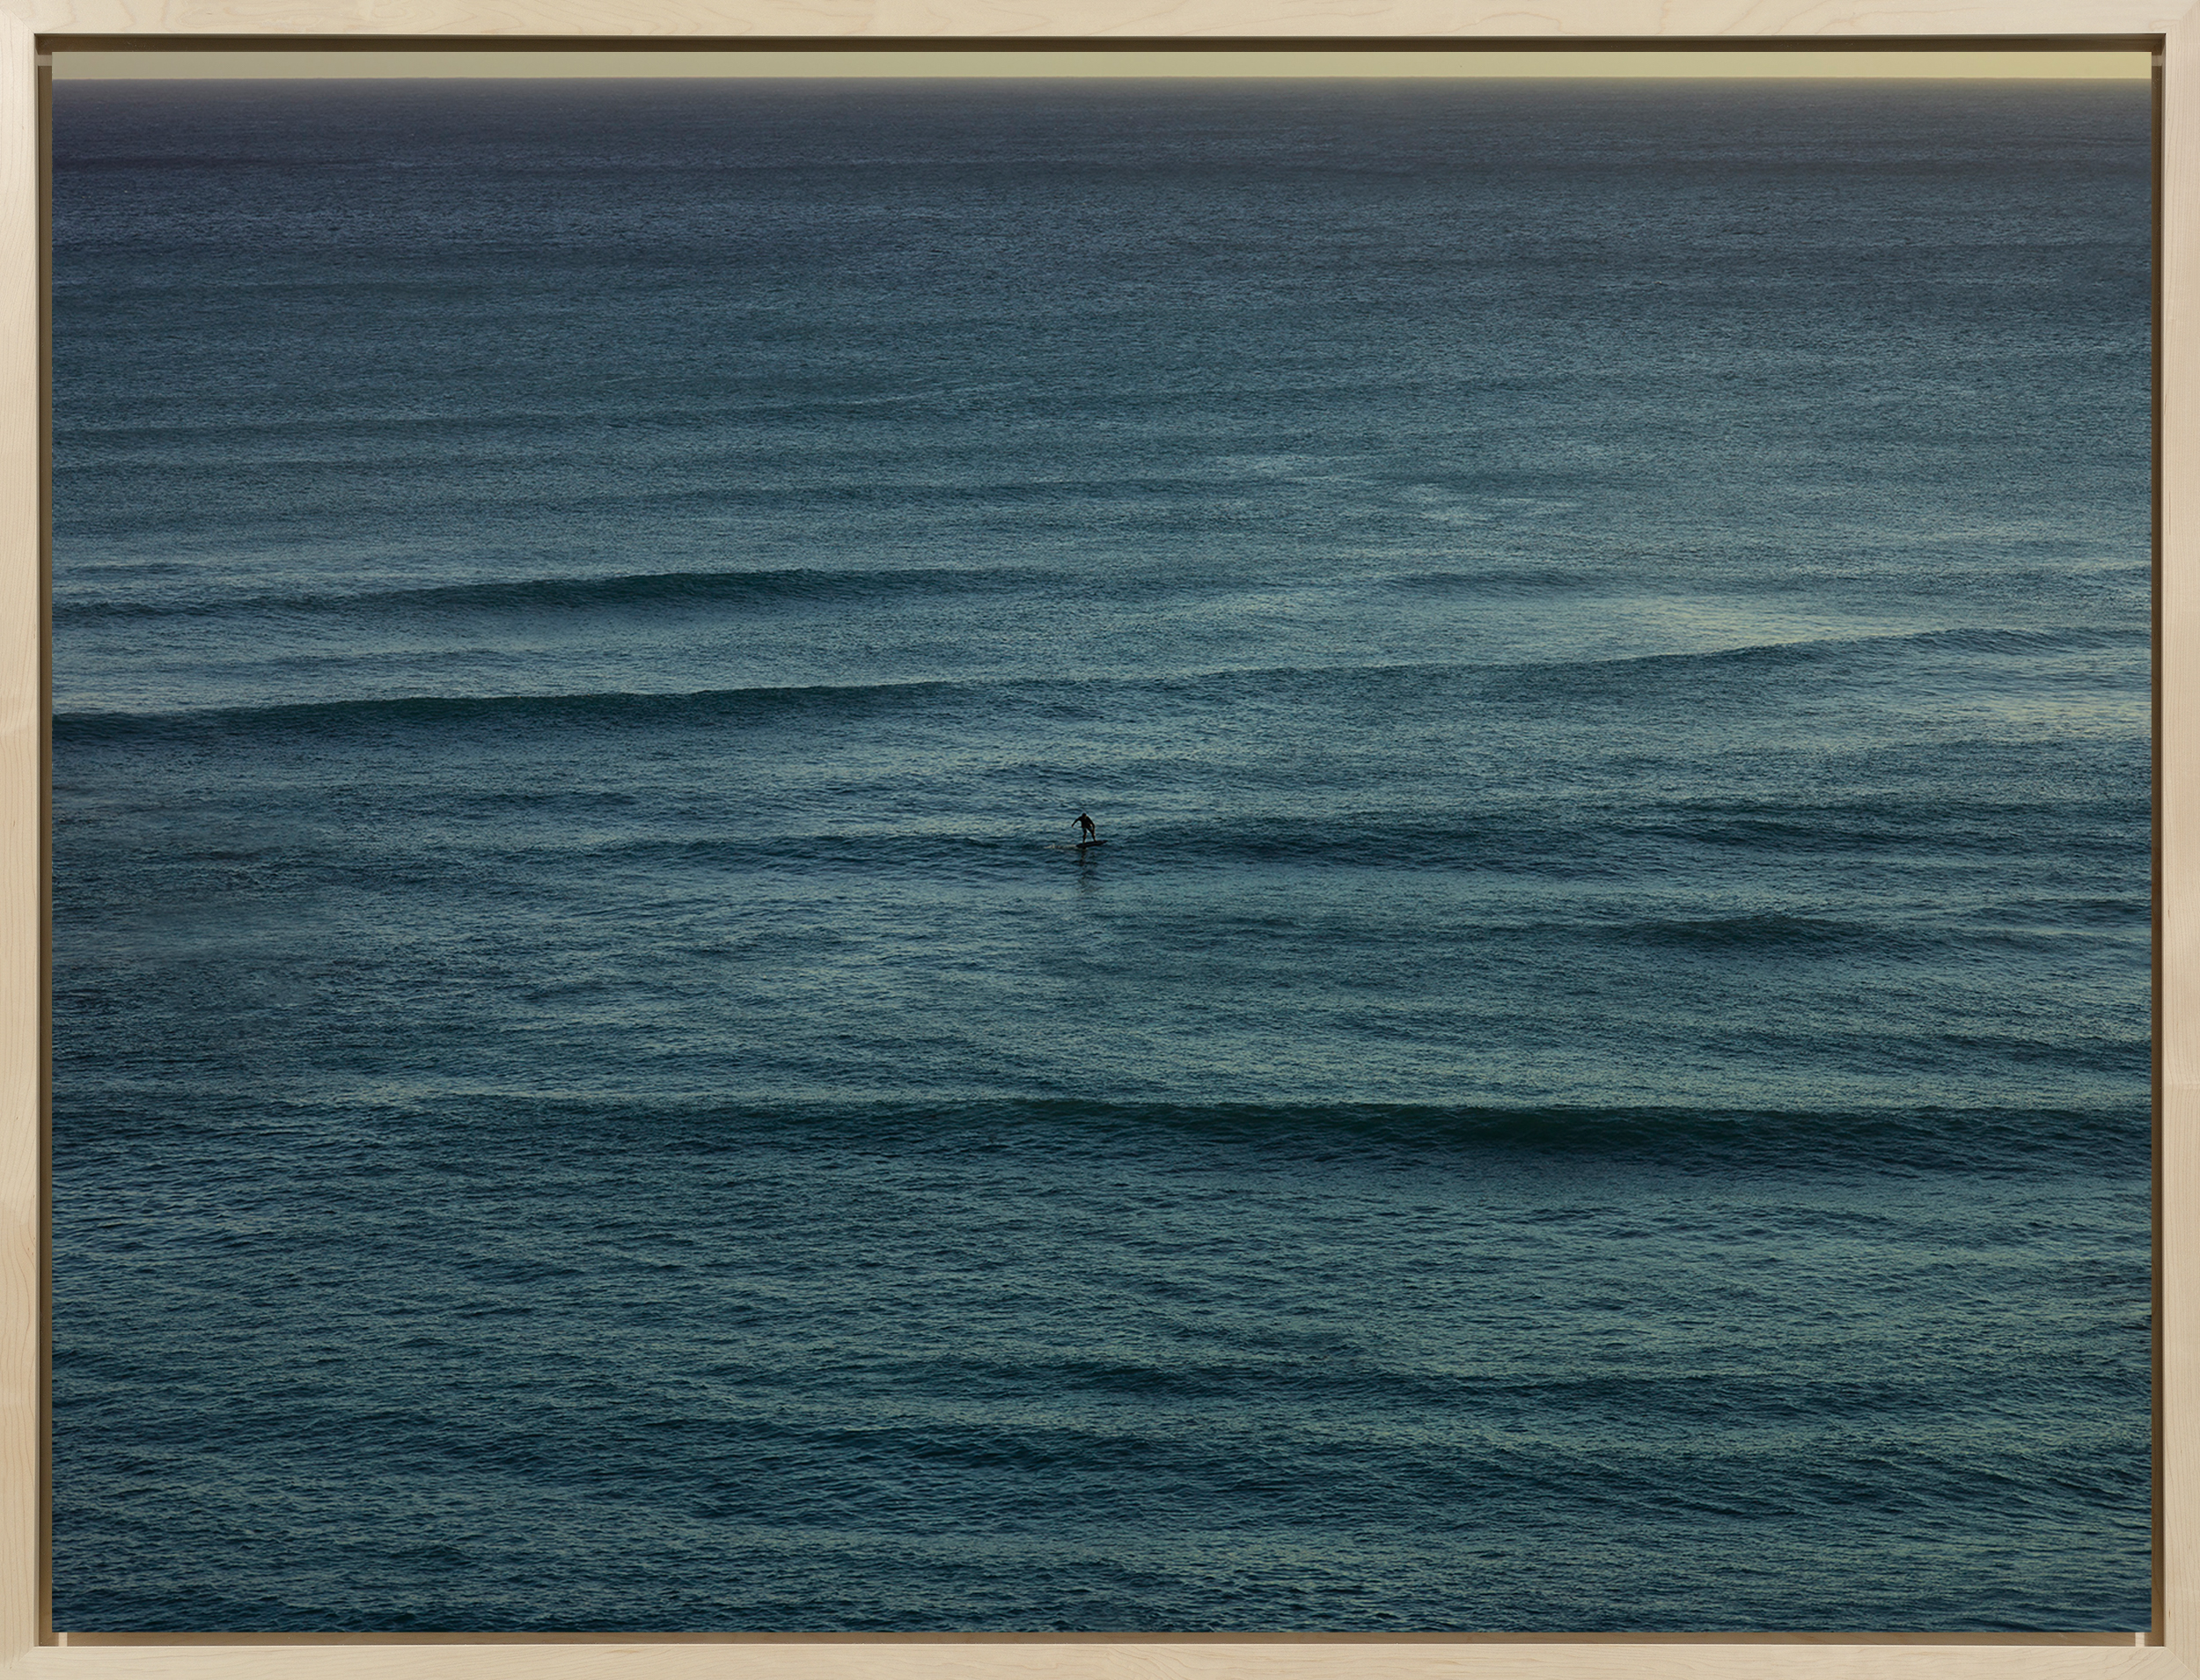 Color photograph of a surfer riding waves on the middle of the ocean framed in bleached wood